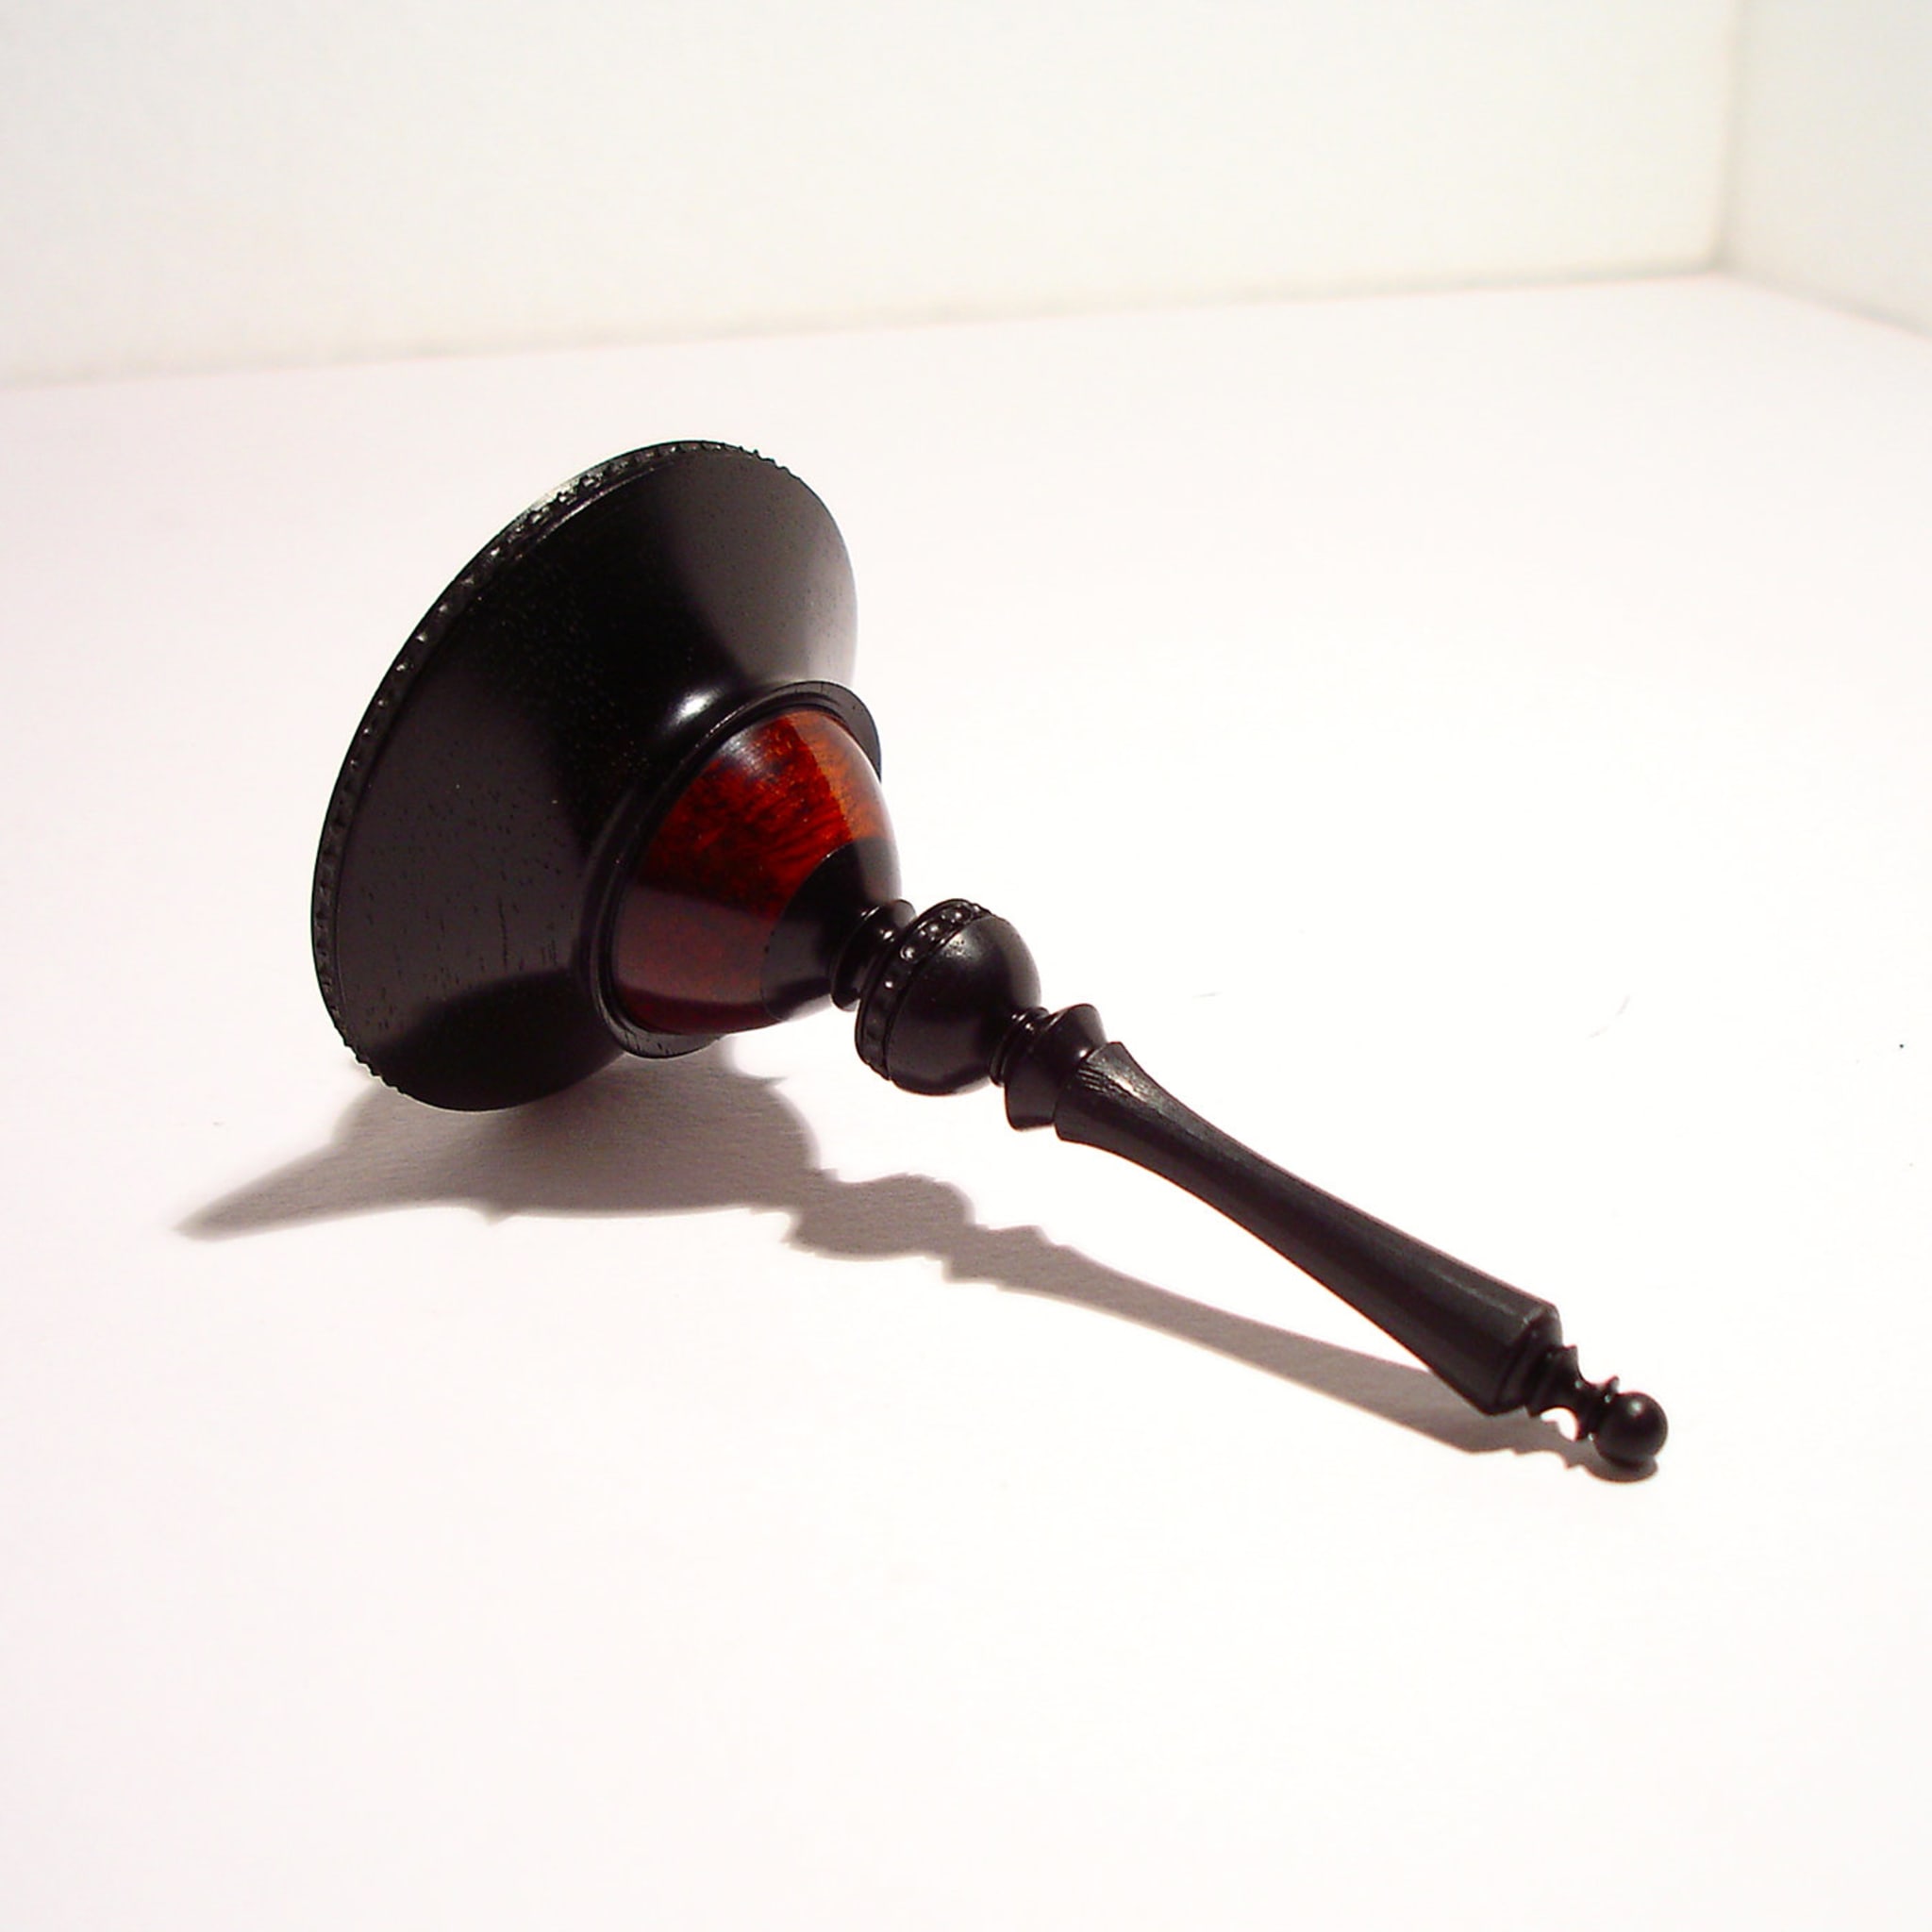 DarkStyle Spinning Top in Ebony and Snakewood - Alternative view 2